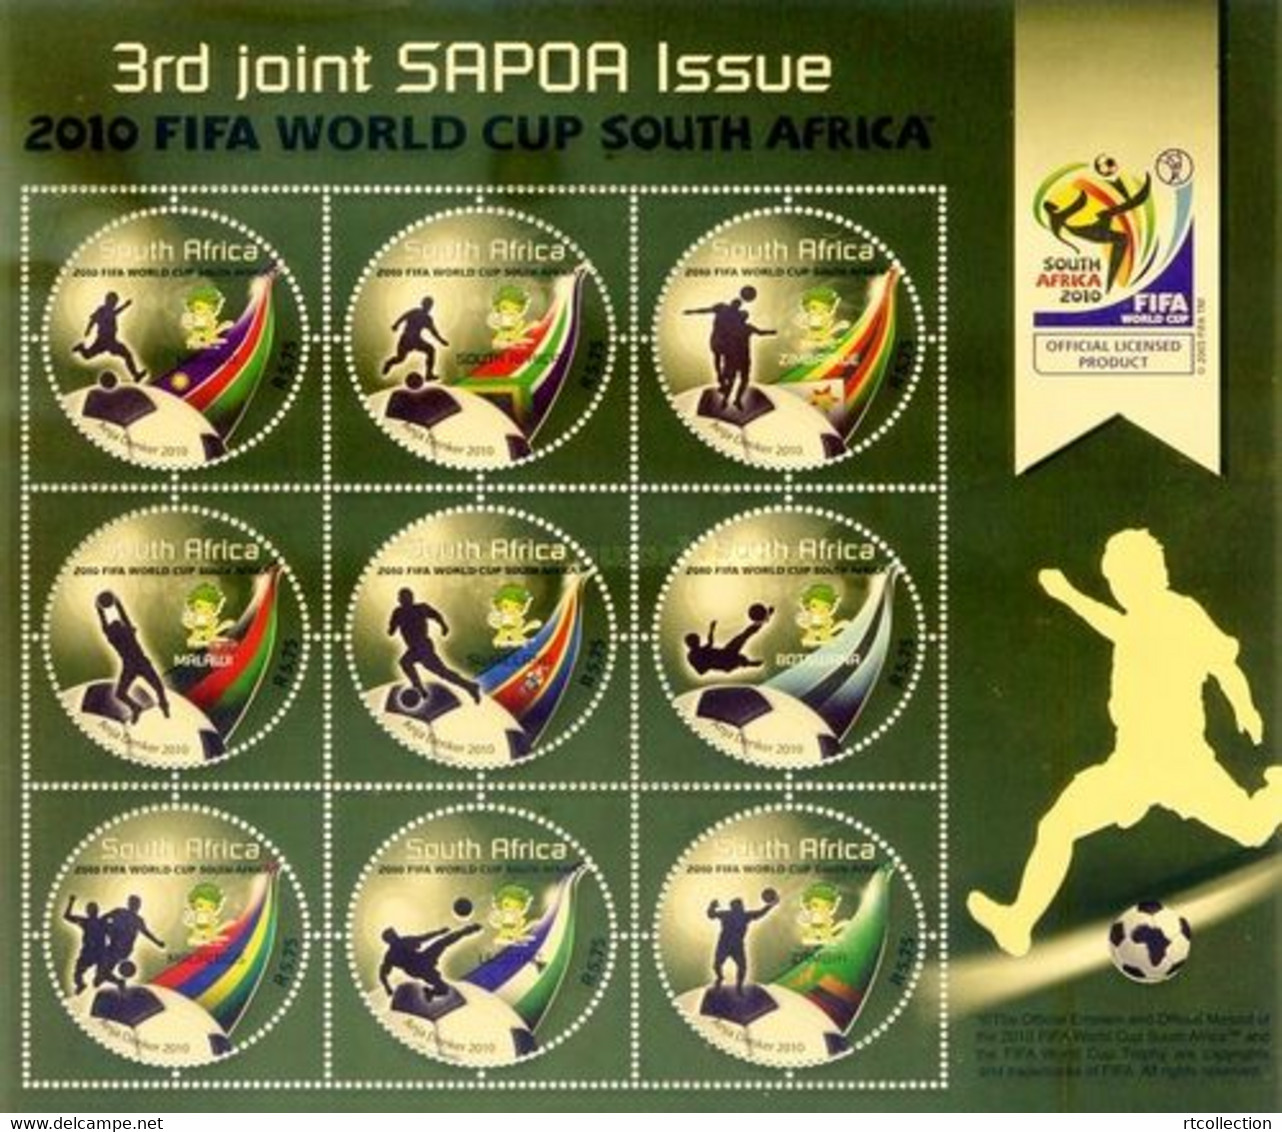 South Africa RSA 2010 Sheet 3rd Joint SAPOA Issue FIFA World Cup Football Game Soccer Sports Round Shap Stamps MNH - Ongebruikt